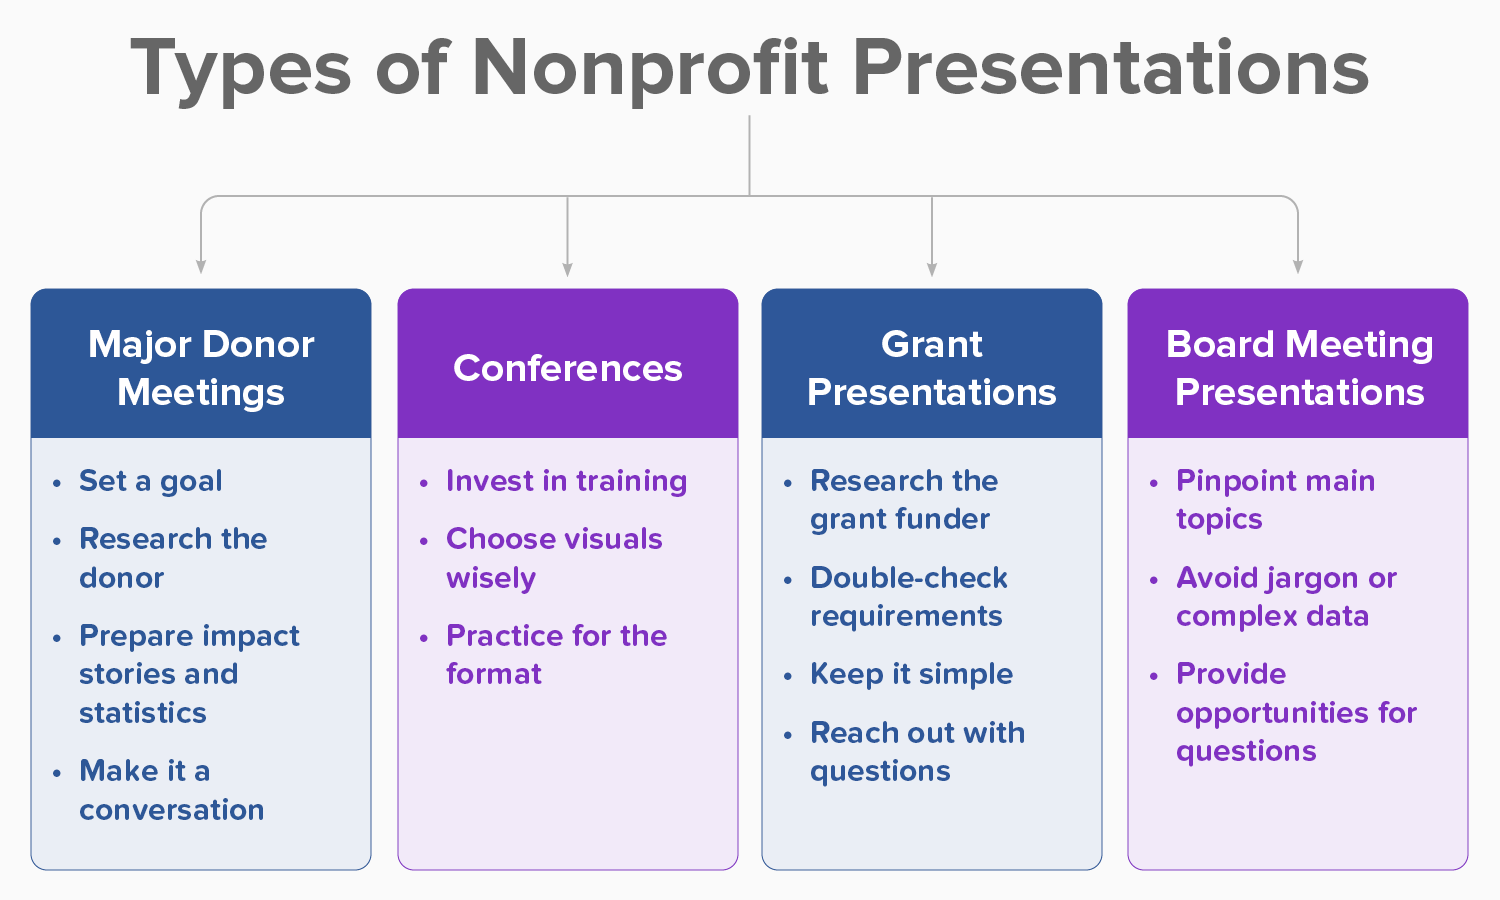 A nonprofit professional writing on a whiteboard during a nonprofit presentation.